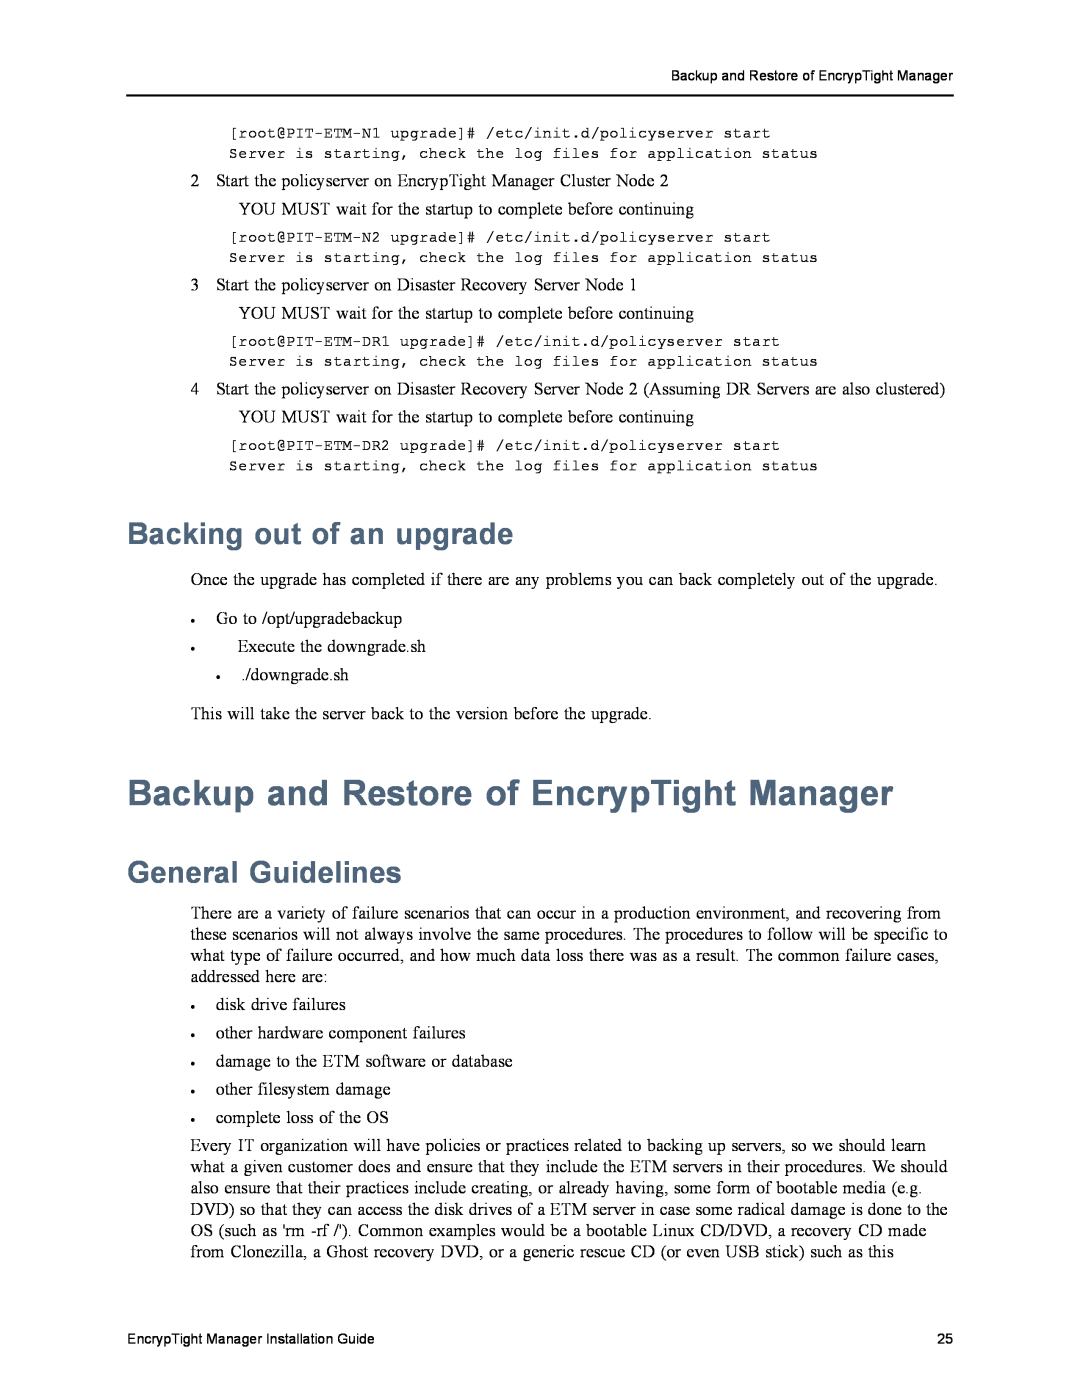 Black Box ET1000A, ET0010A manual Backup and Restore of EncrypTight Manager, Backing out of an upgrade, General Guidelines 